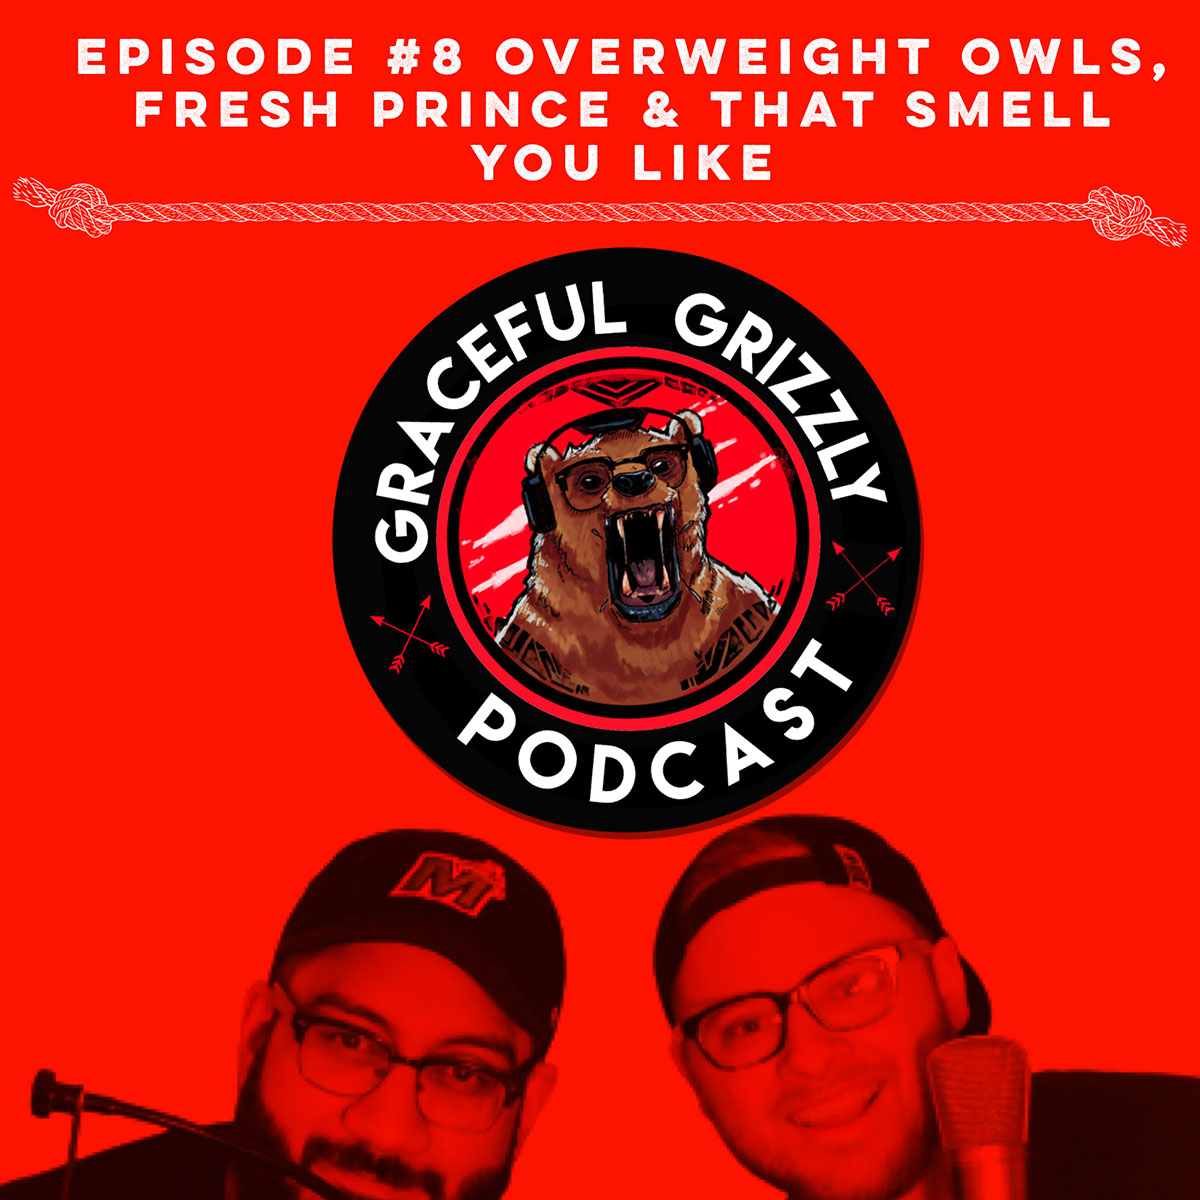 Episode 8 - Graceful Grizzly Podcast